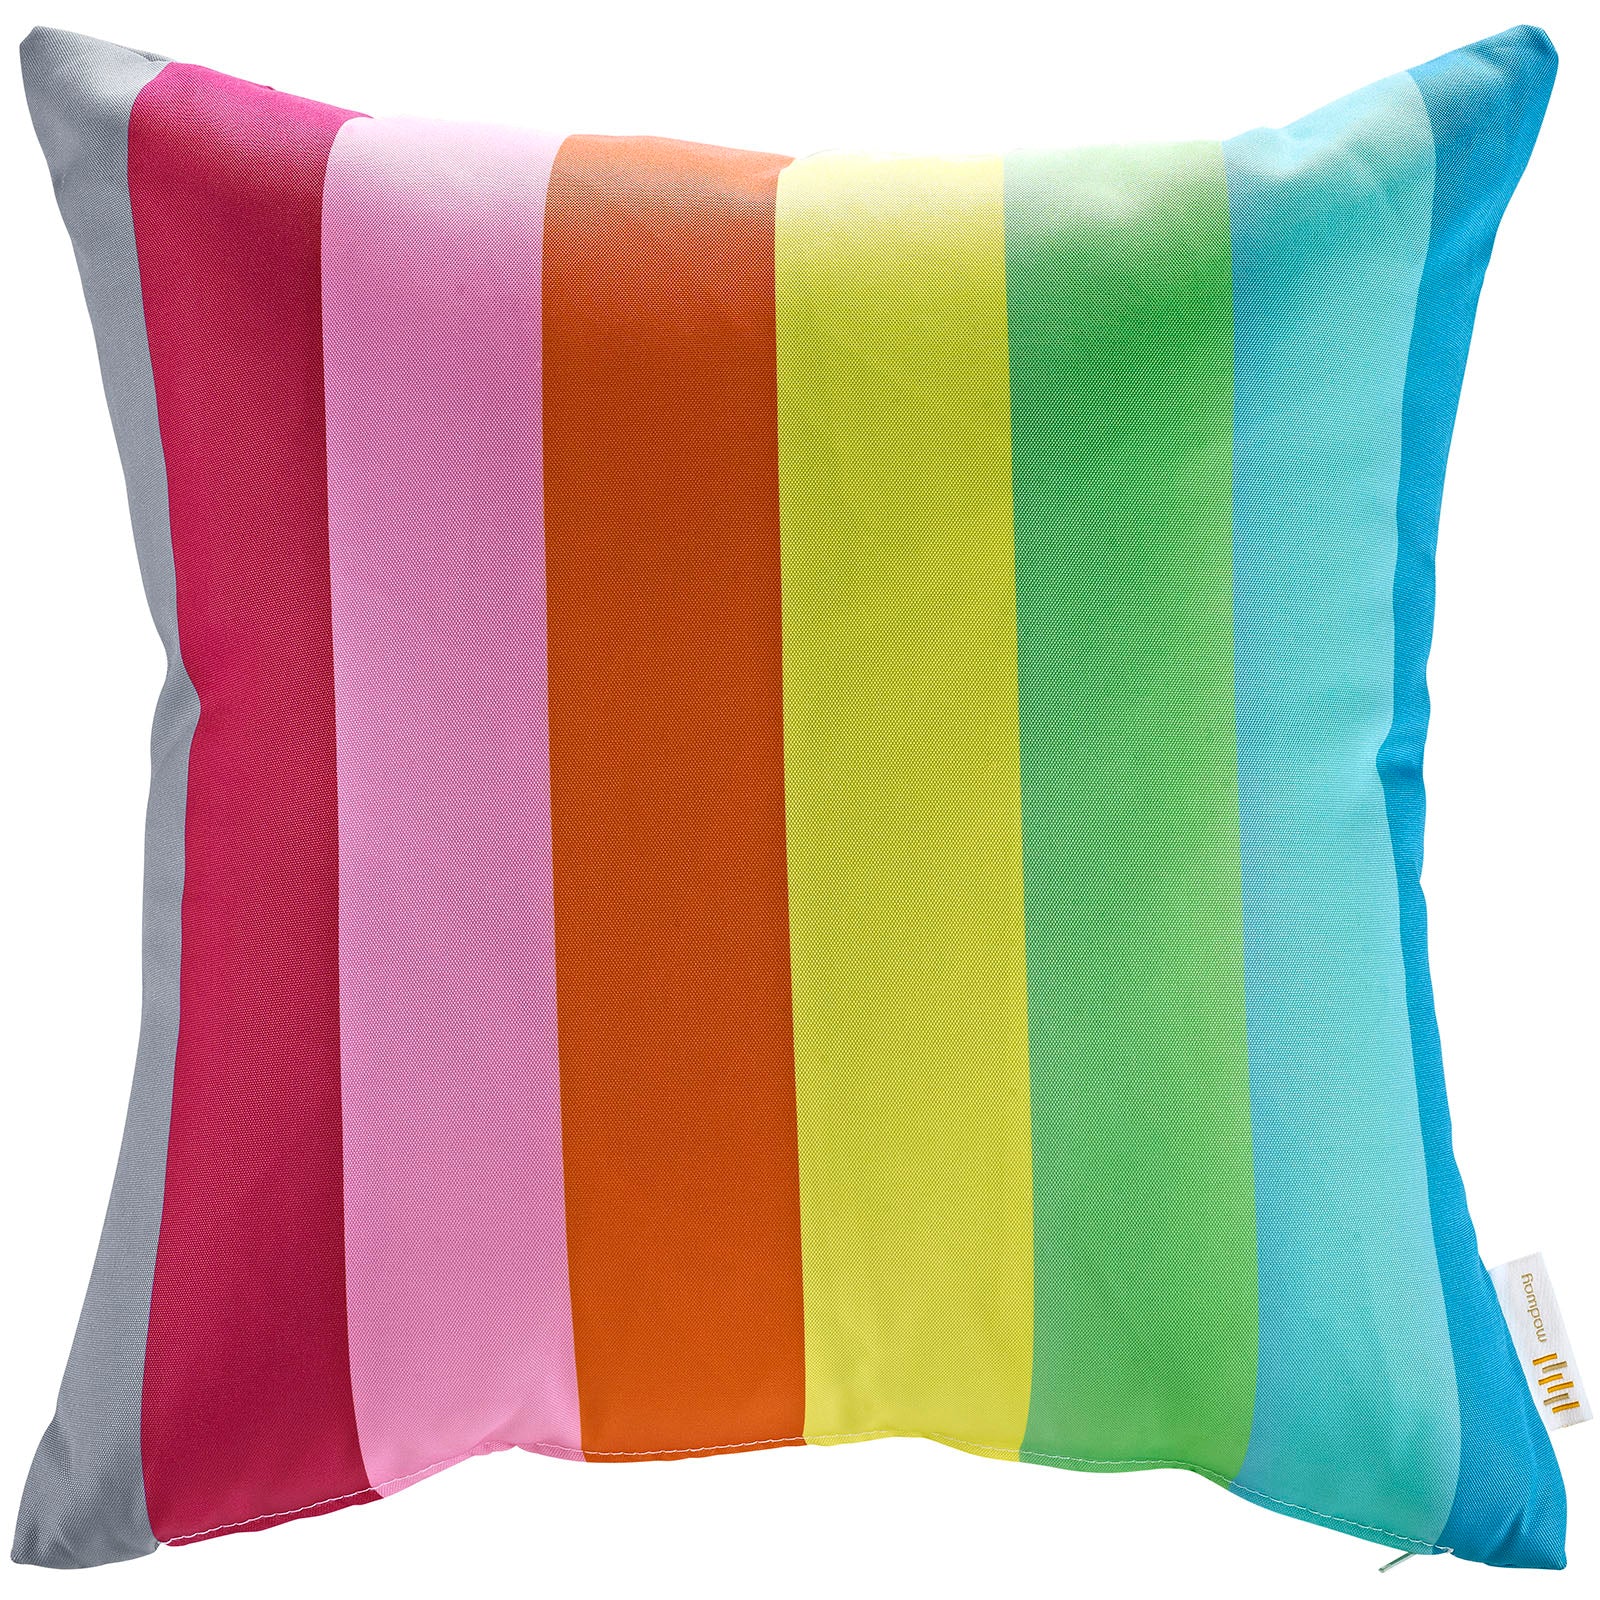 Modway Outdoor Pillows & Cushions - Modway Two Piece Outdoor Patio Pillow Set Rainbow